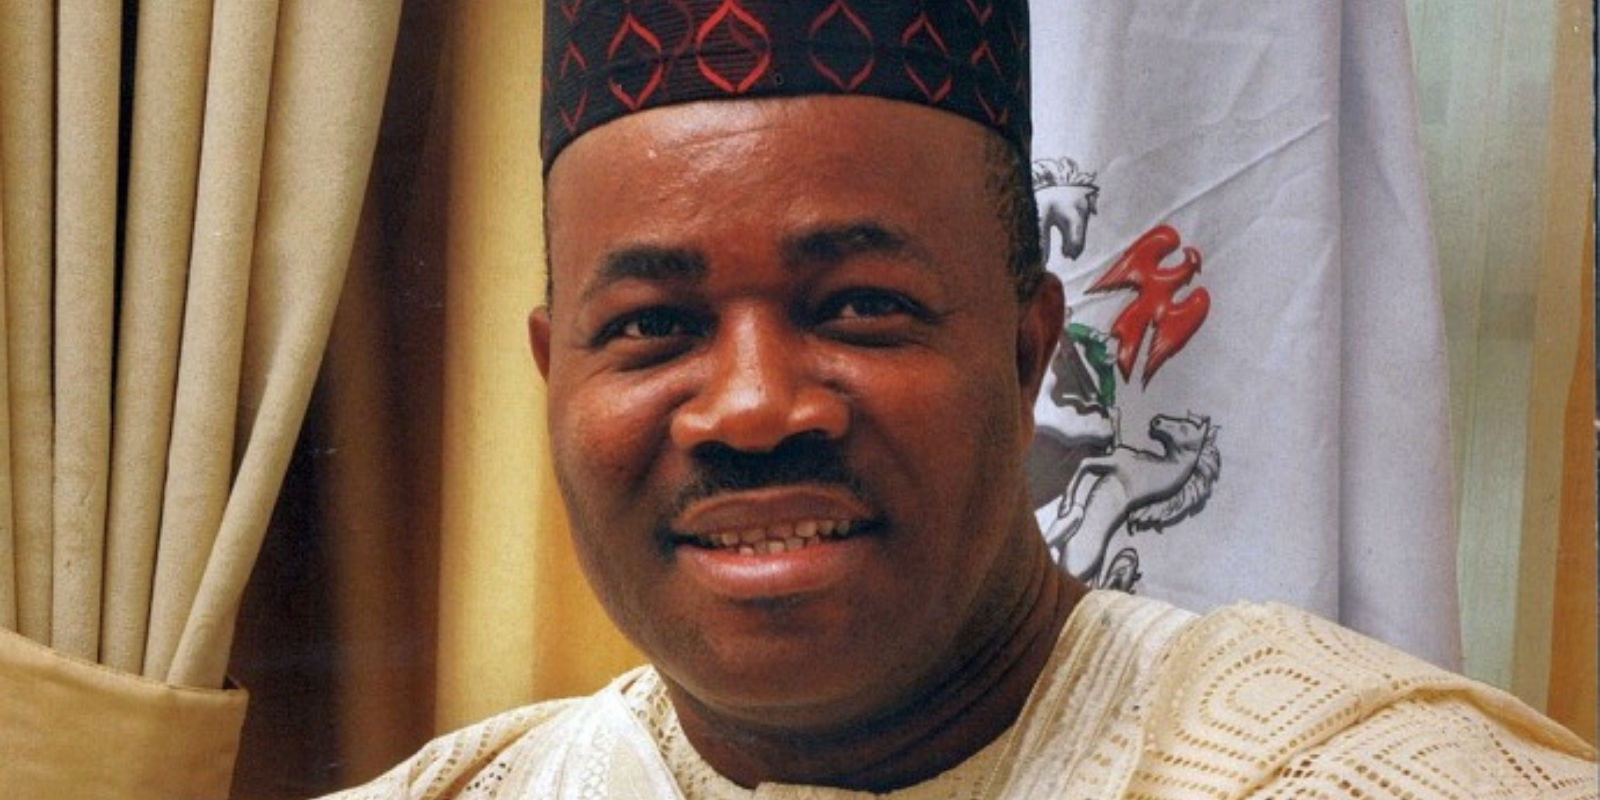 Godwill Akpabio was the governor of which state?